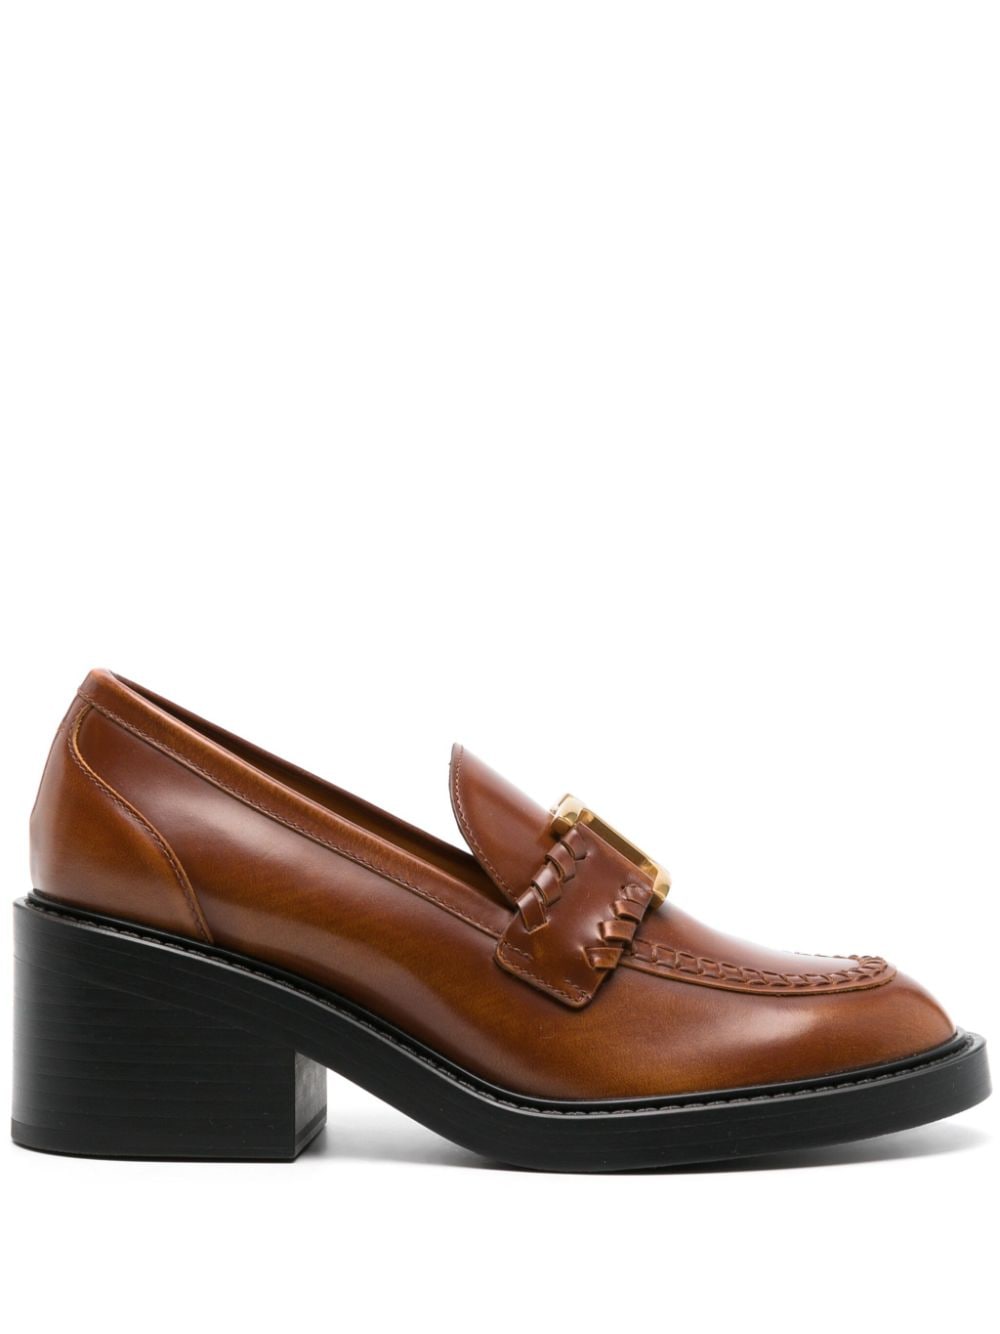 Chloé Marcie 60mm leather loafers - Brown von Chloé